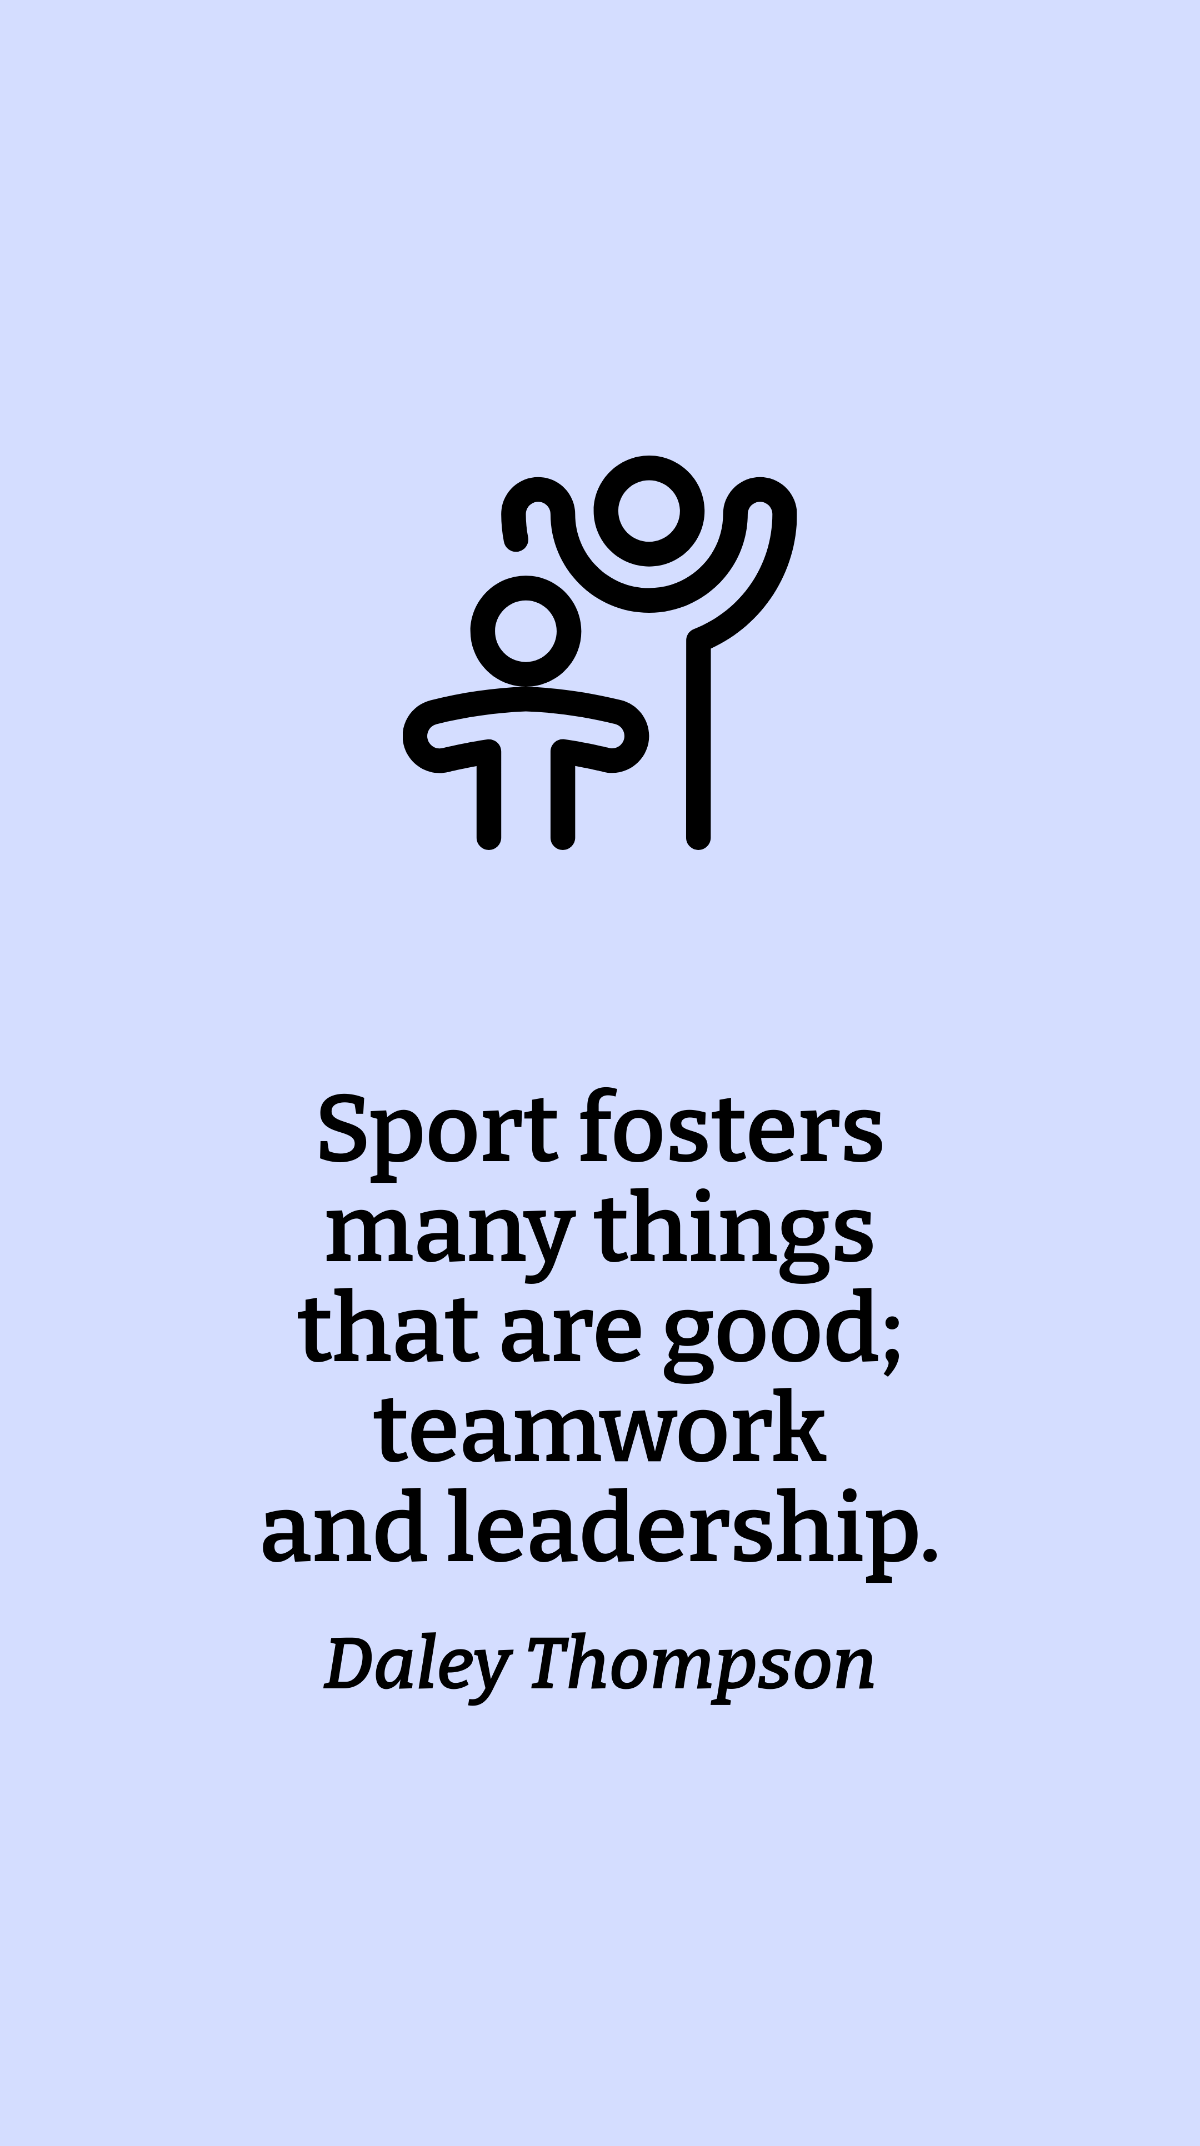 Daley Thompson - Sport fosters many things that are good; teamwork and leadership.